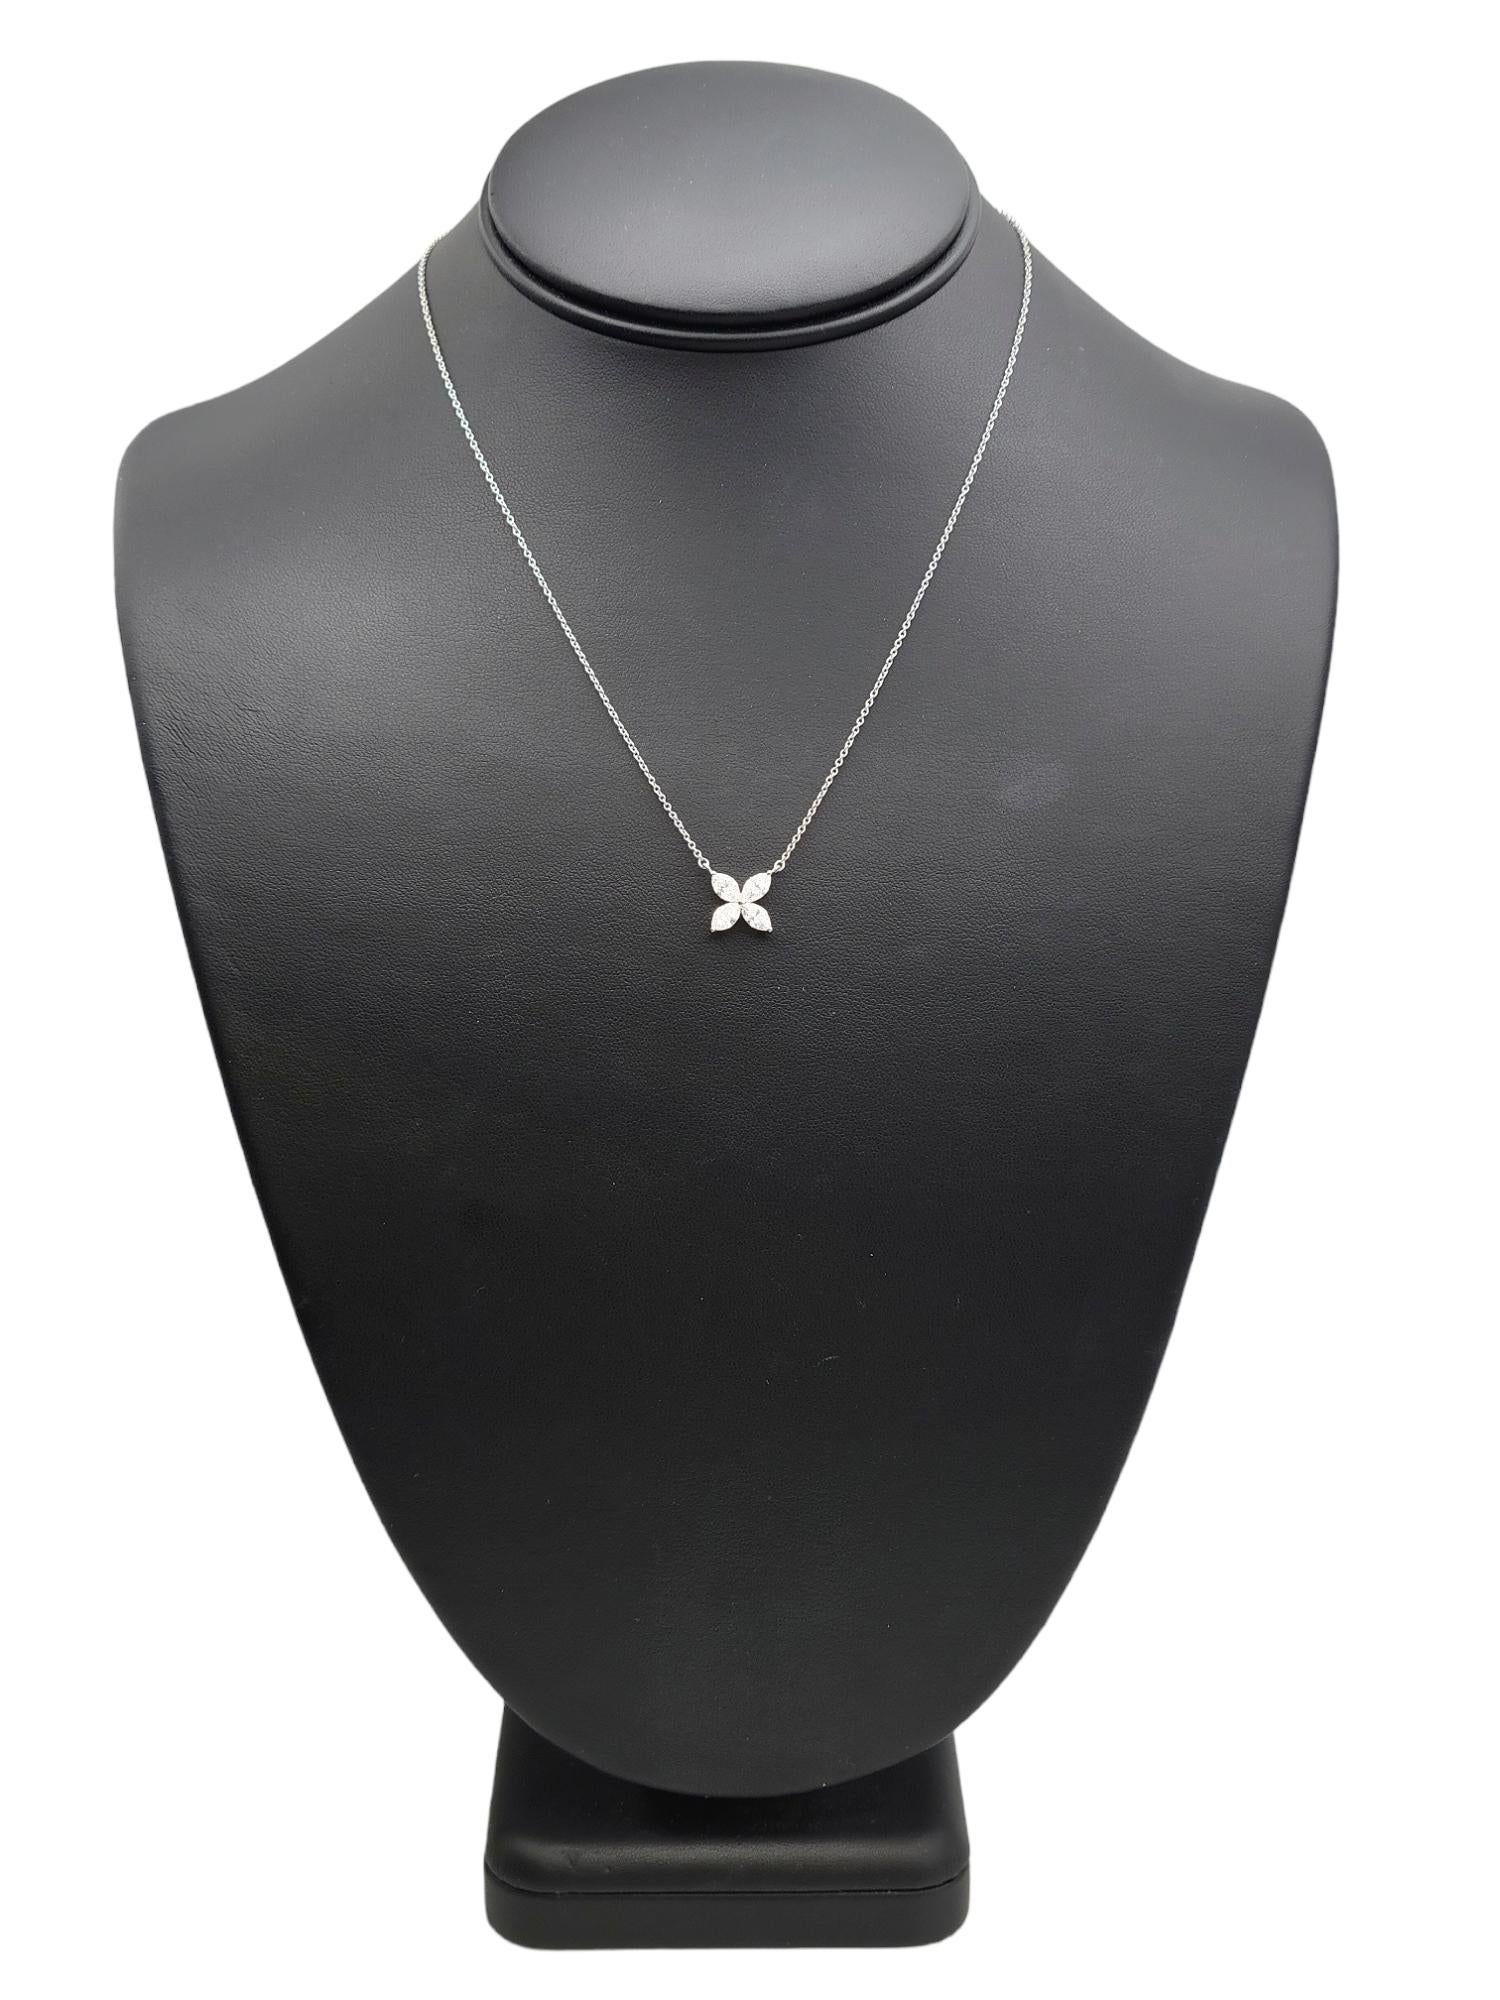 Tiffany & Co. Victoria Diamond .92 Carats Large Pendant Necklace in Platinum For Sale 2